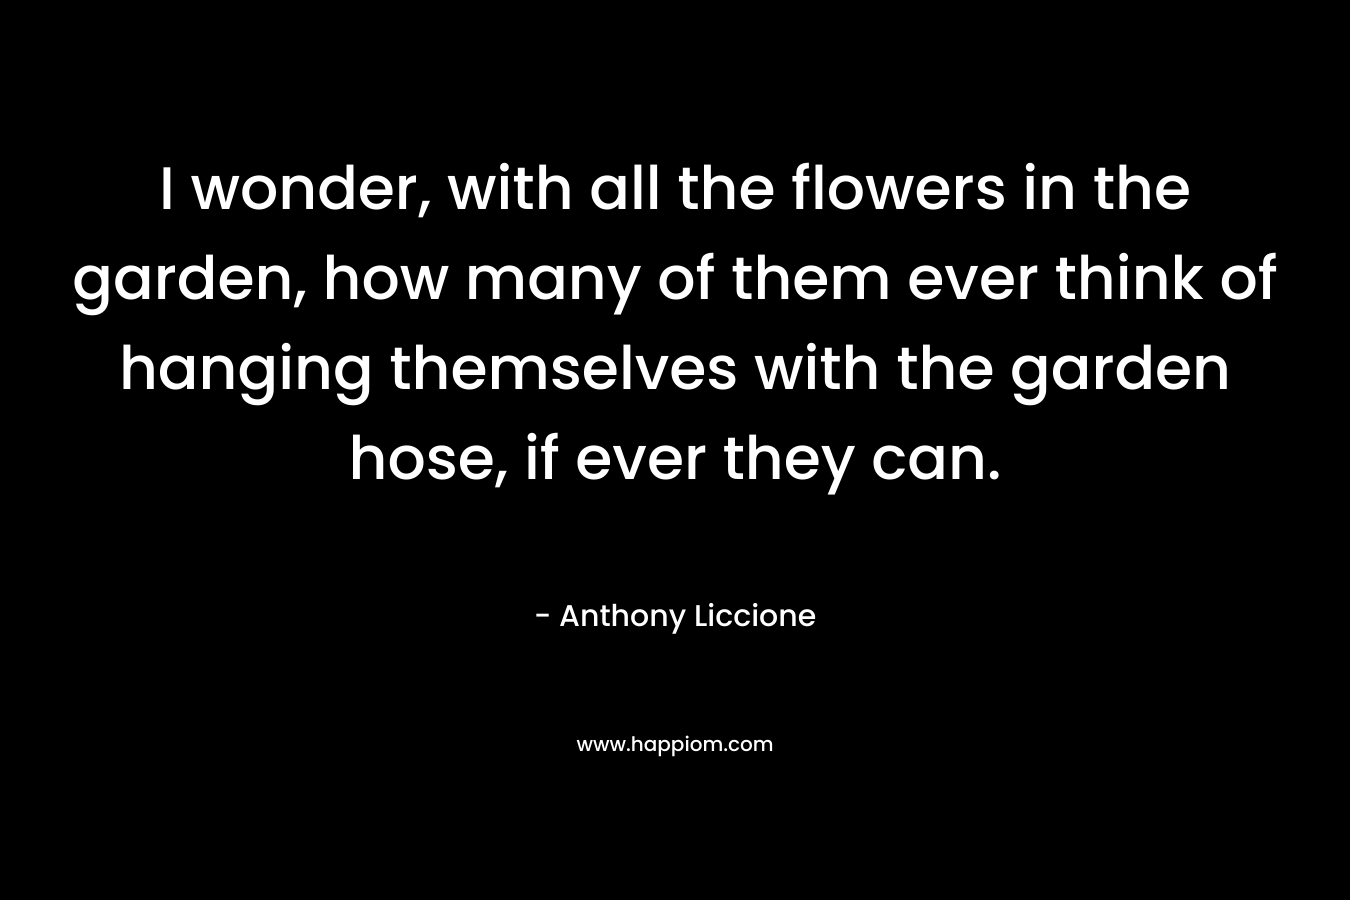 I wonder, with all the flowers in the garden, how many of them ever think of hanging themselves with the garden hose, if ever they can.